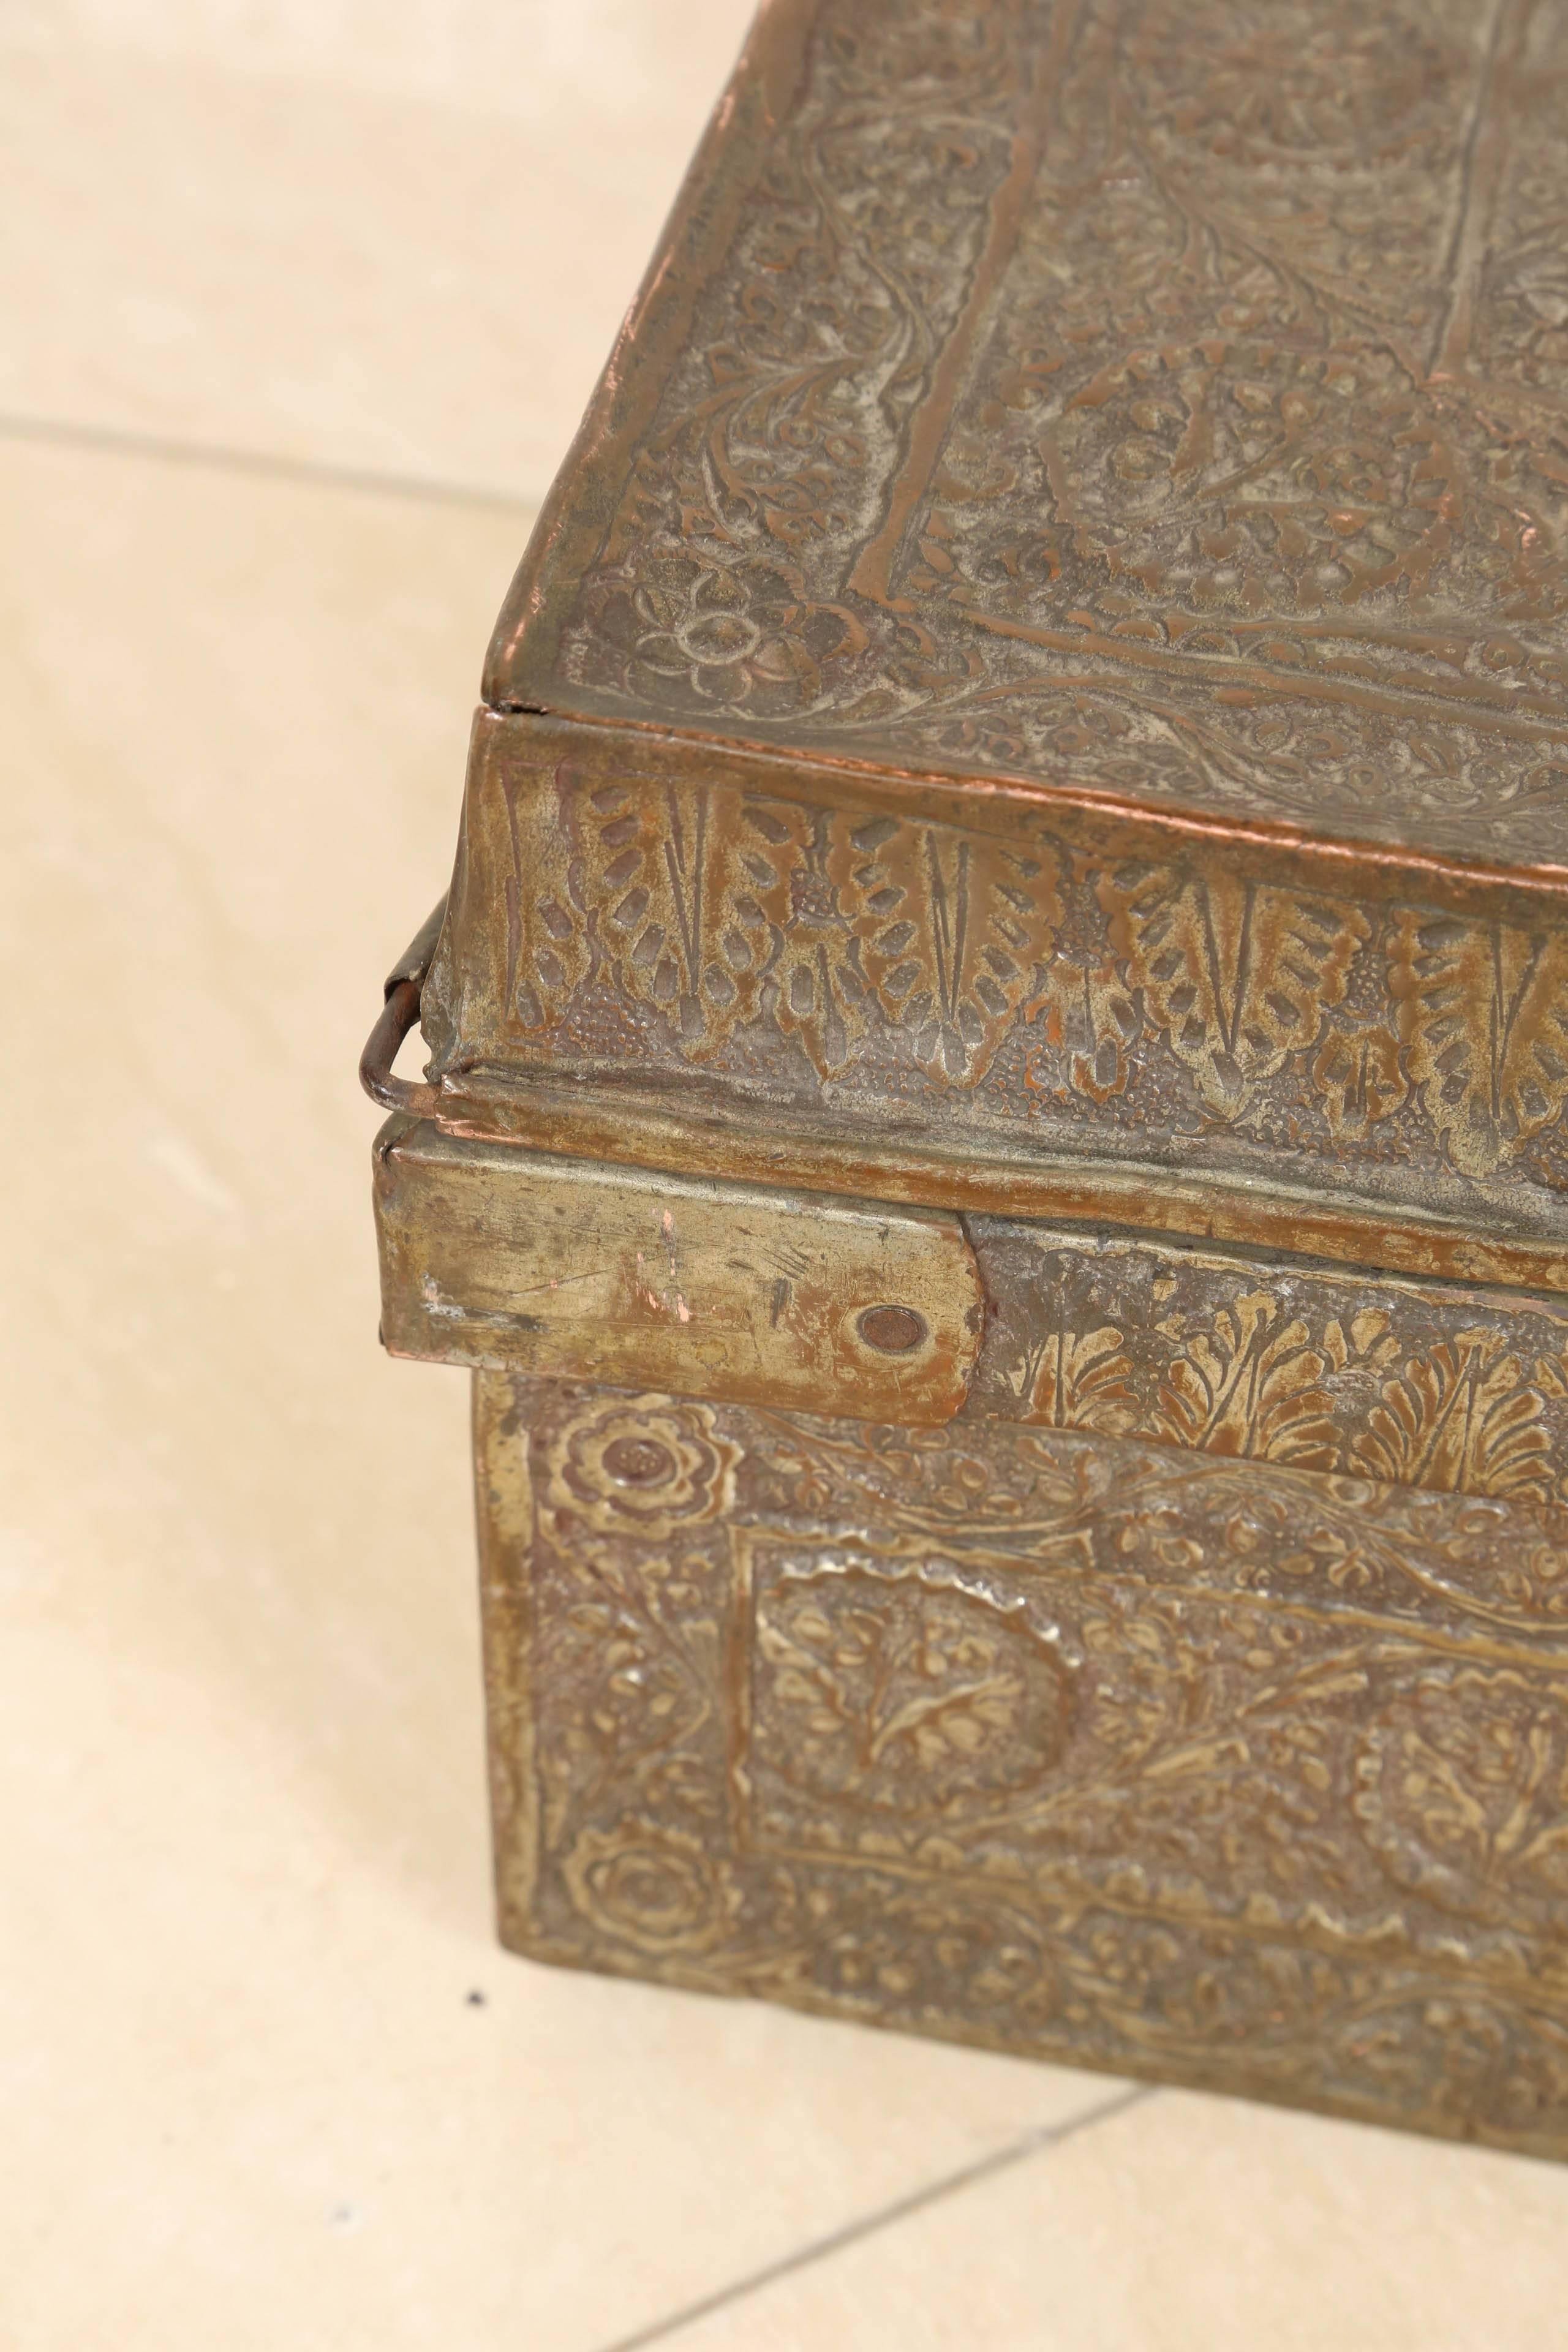 Antique 19th Century impressive Anglo Indian large tinned copper treasure chest / casket, massive size, of rectangular form with hinged lid, hinged handles, profusely embossed with scrolling foliage.
Handcrafted exceptionally large and impressive